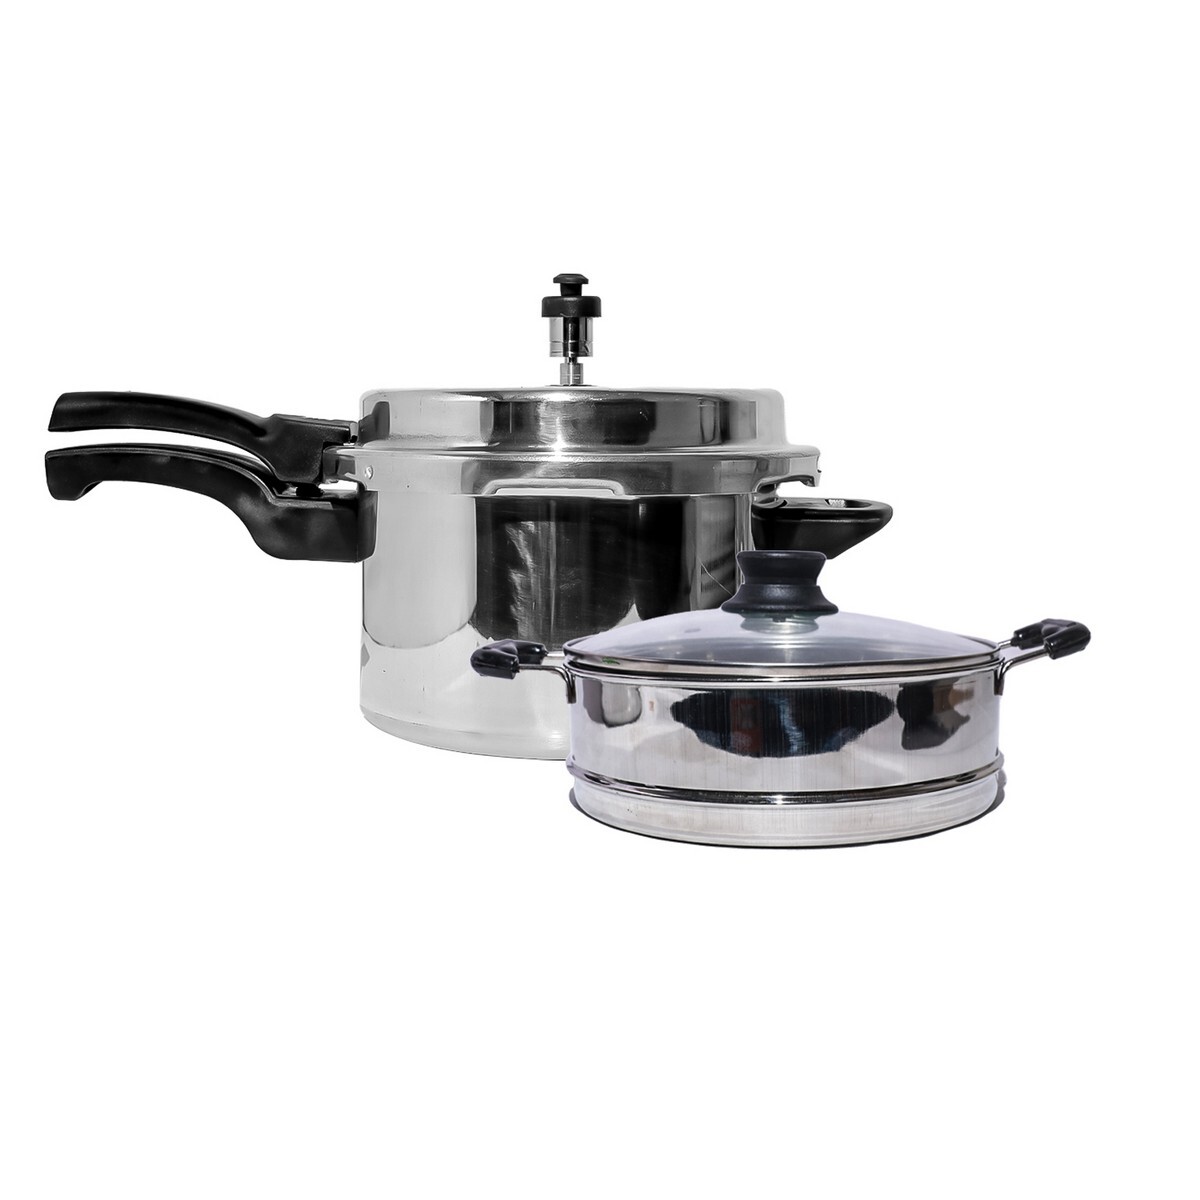 Chefline Cooker 5L & Steamer With Lid 2in1